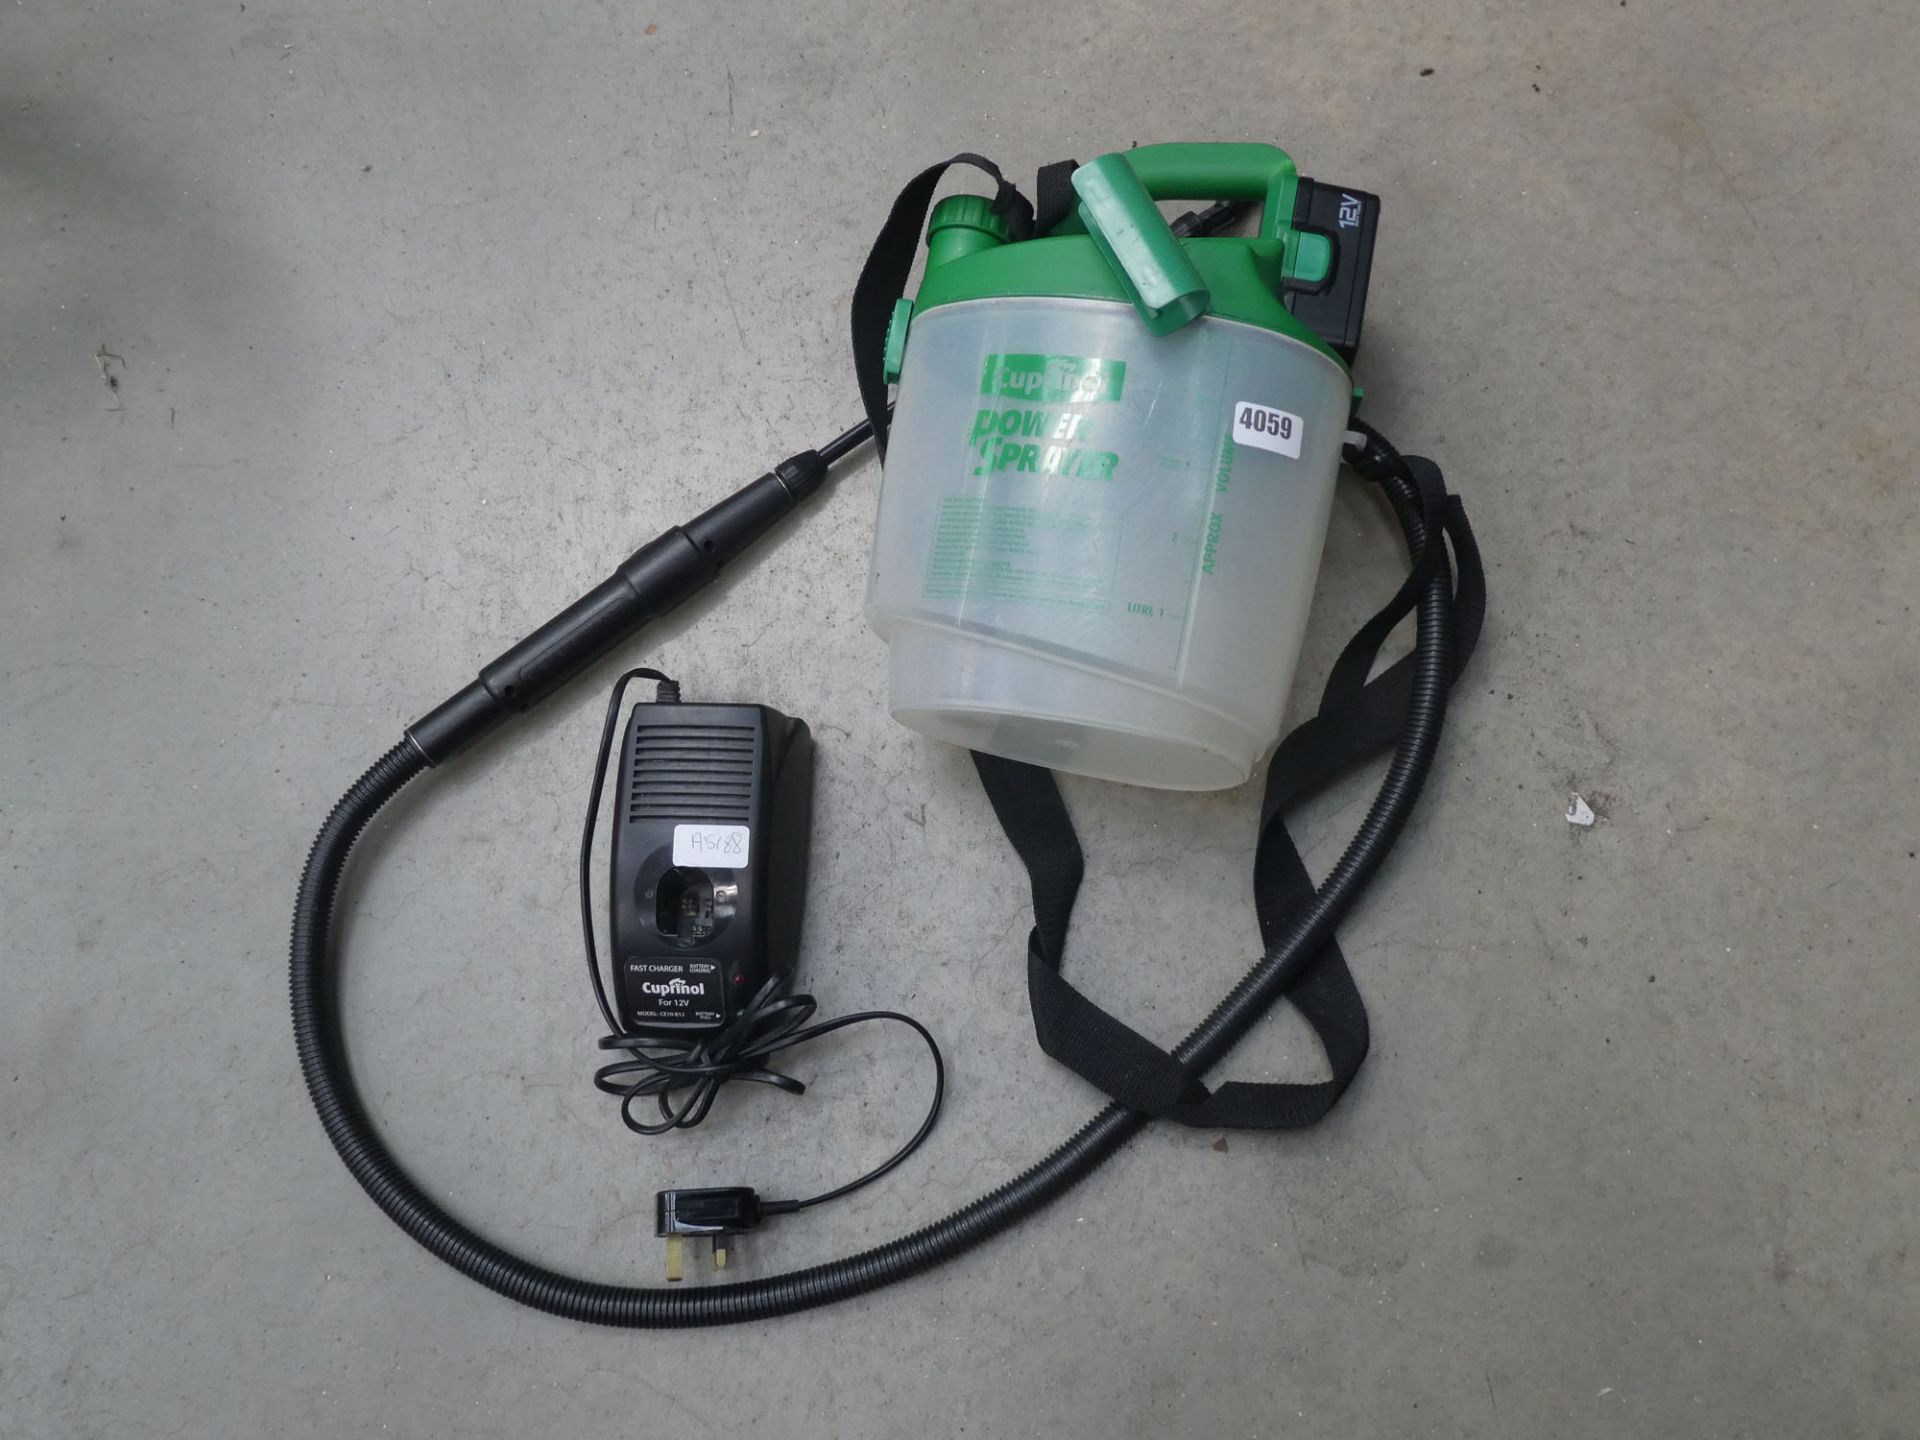 Small Cuprinol power sprayer with battery and charger